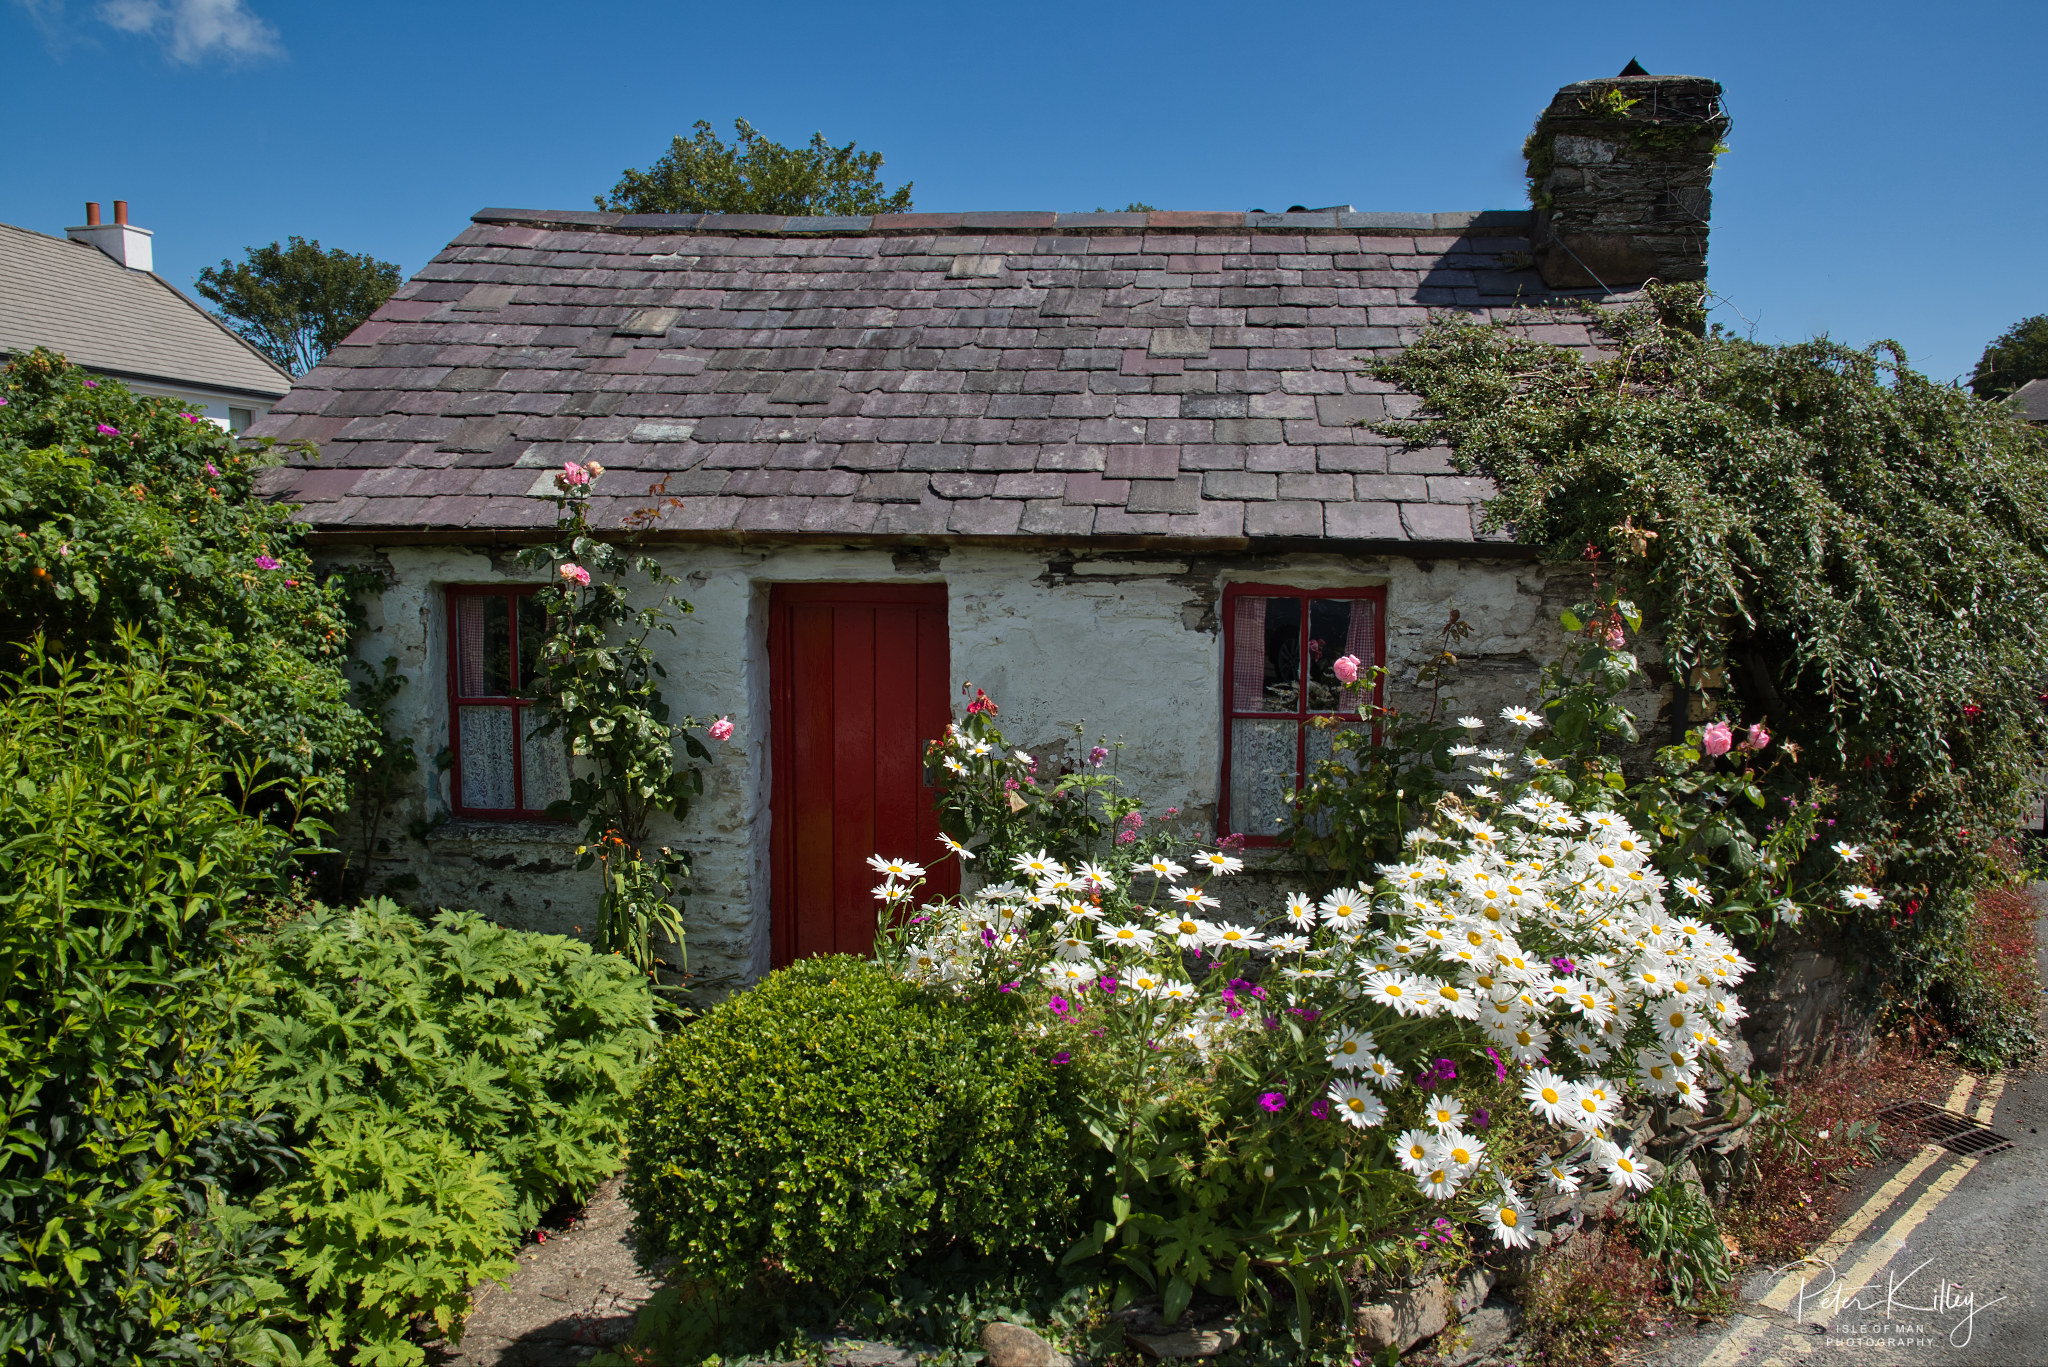 Molly Carrooins Cottage - © Peter Killey - www.manxscenes.com